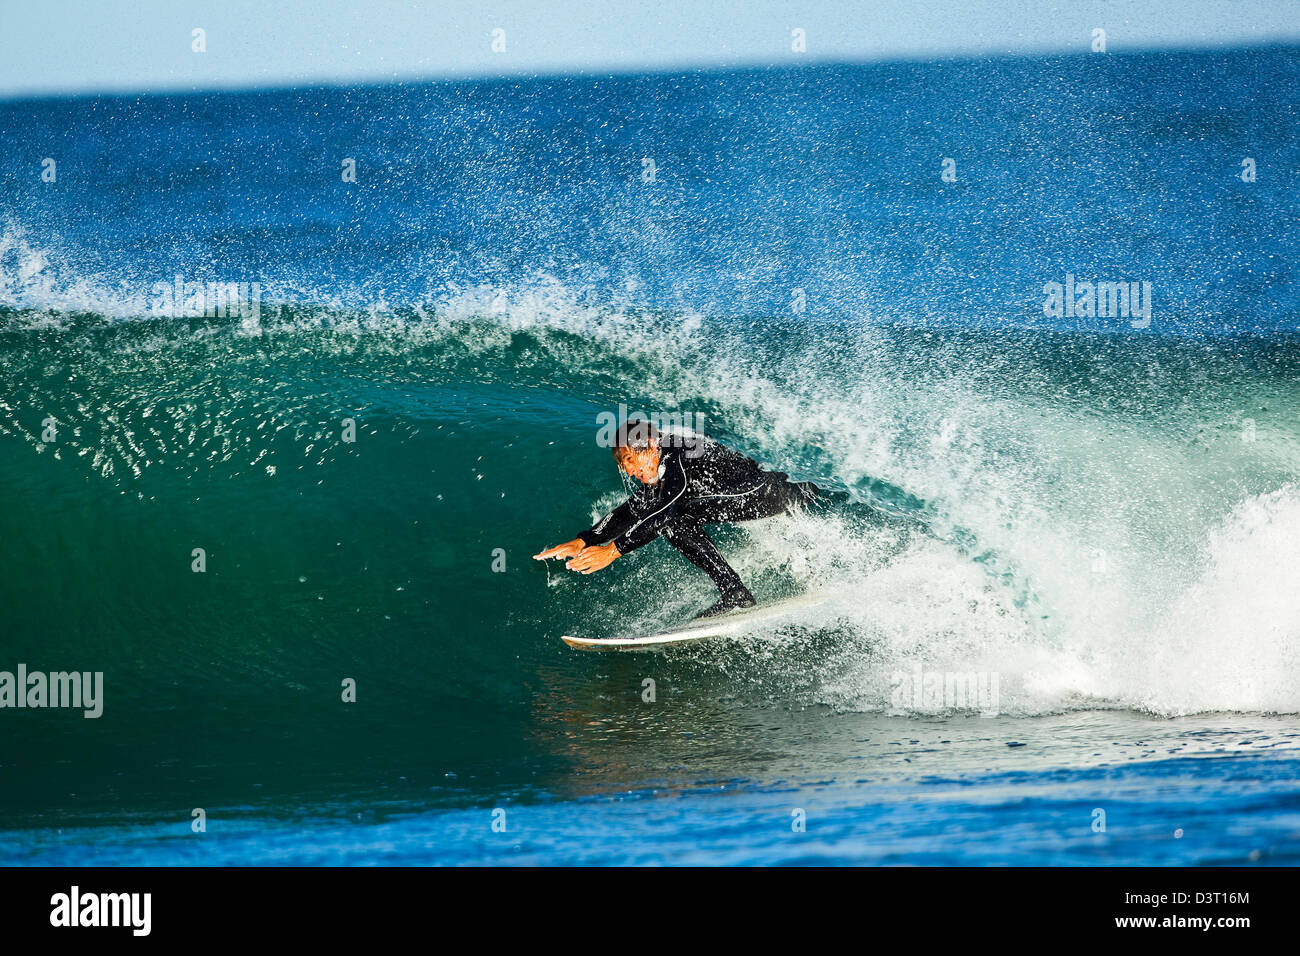 Surfing action, man on wave, Jeffreys Bay, South Africa Stock Photo